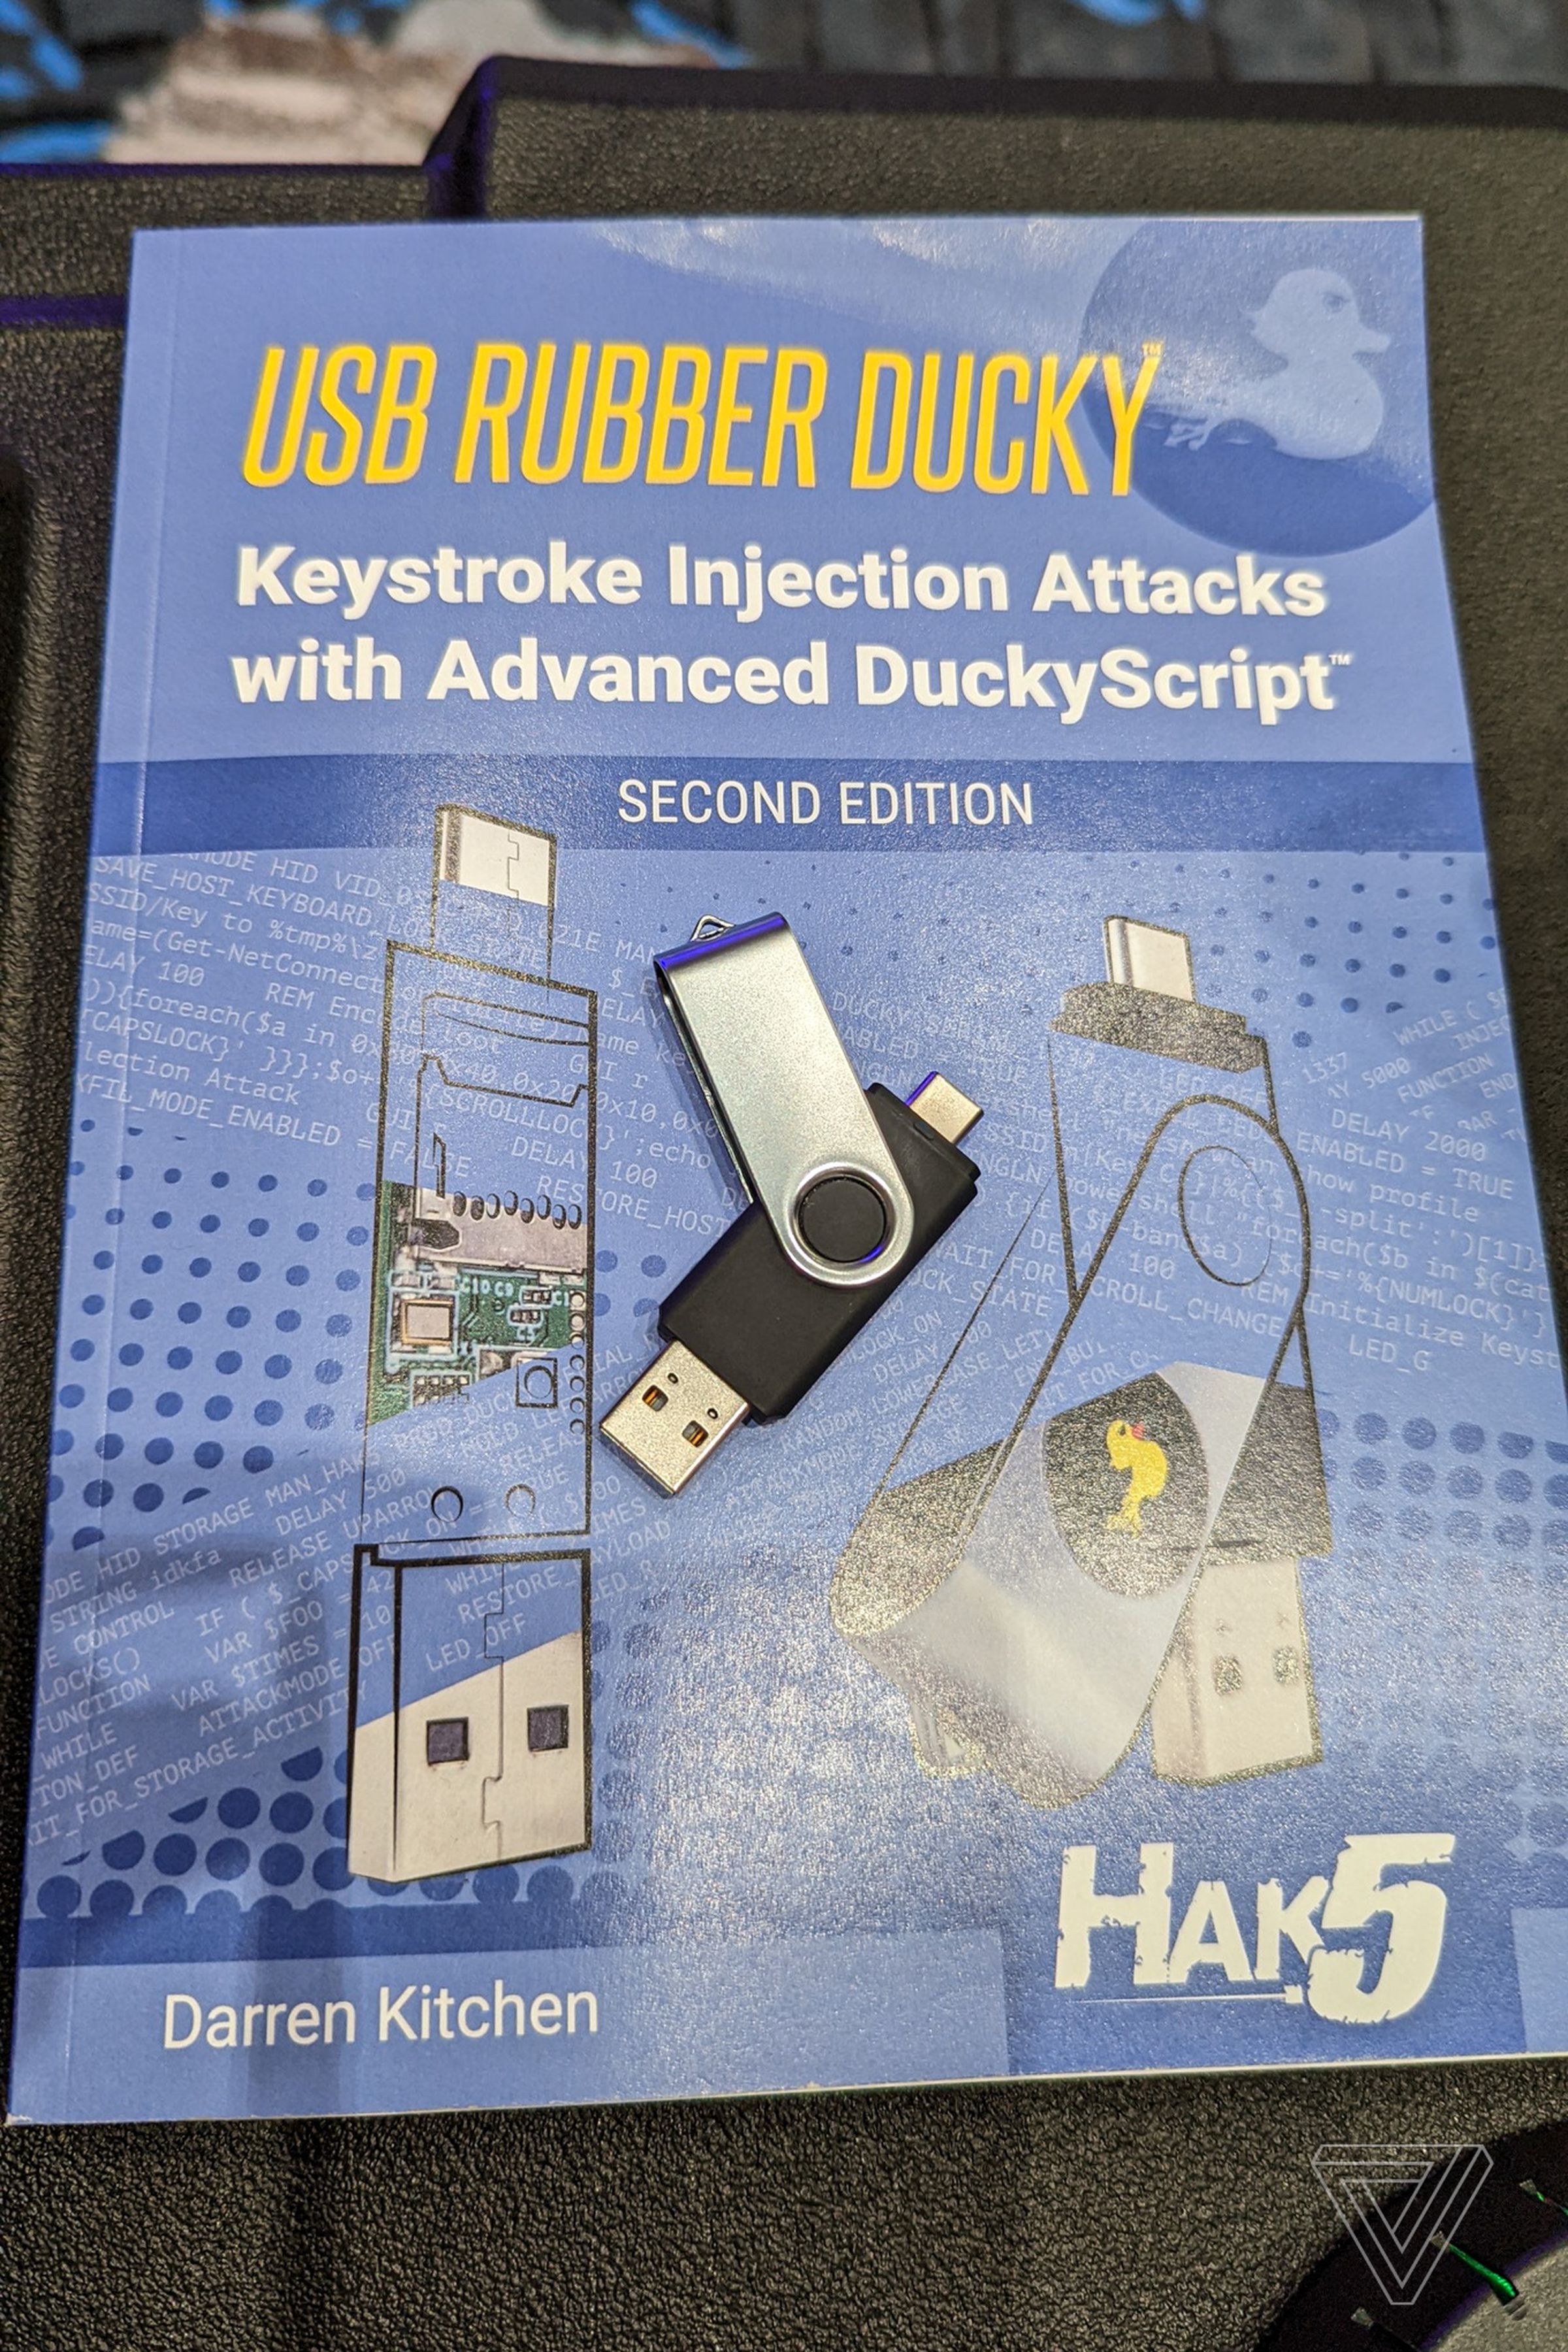 A new guidebook explains the subtleties of DuckyScript 3.0